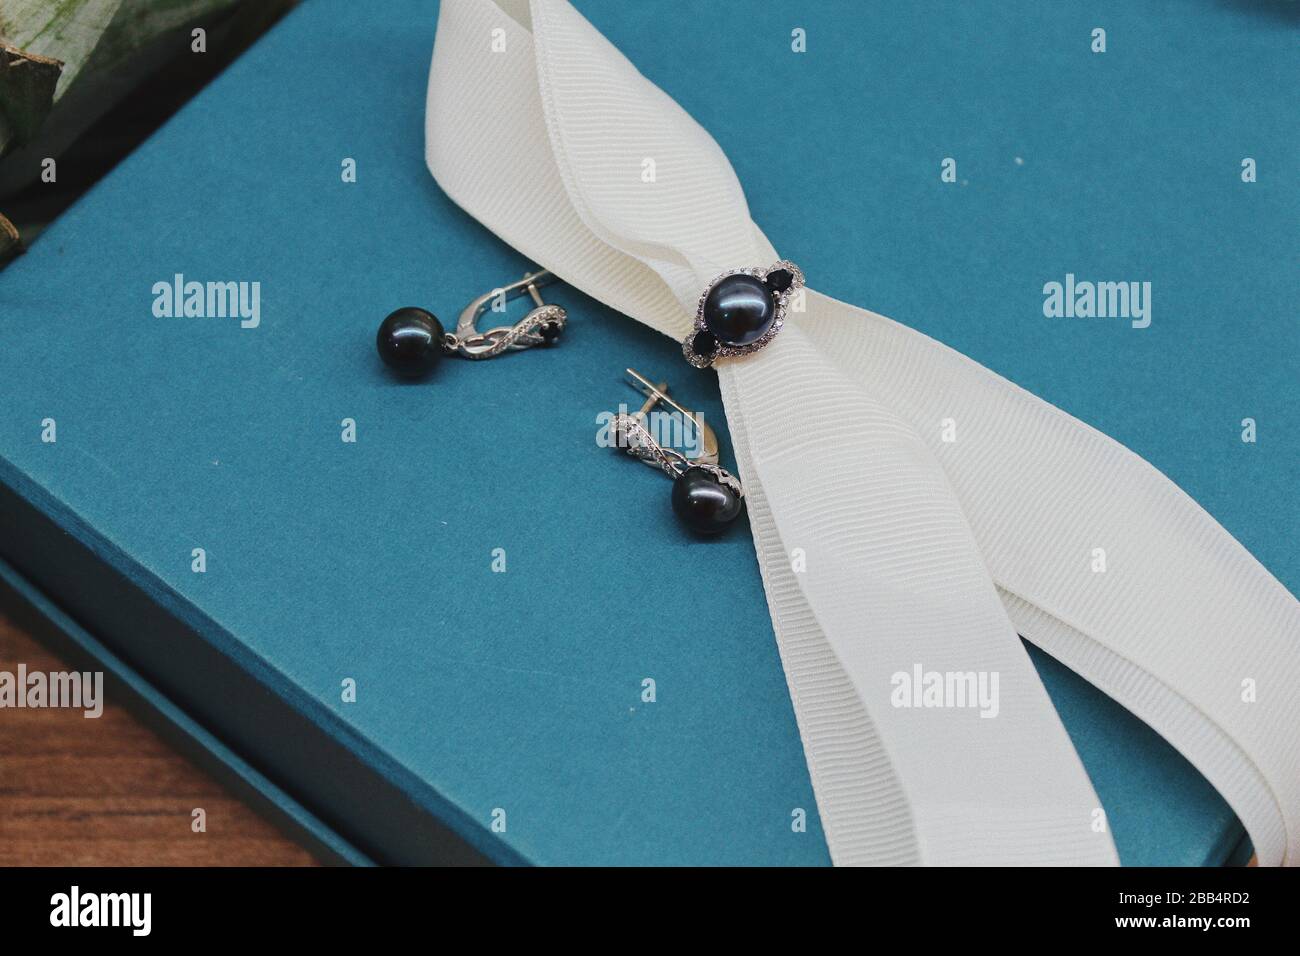 Closeup shot of a ring and earrings with black pearls on a blue jewelry box Stock Photo